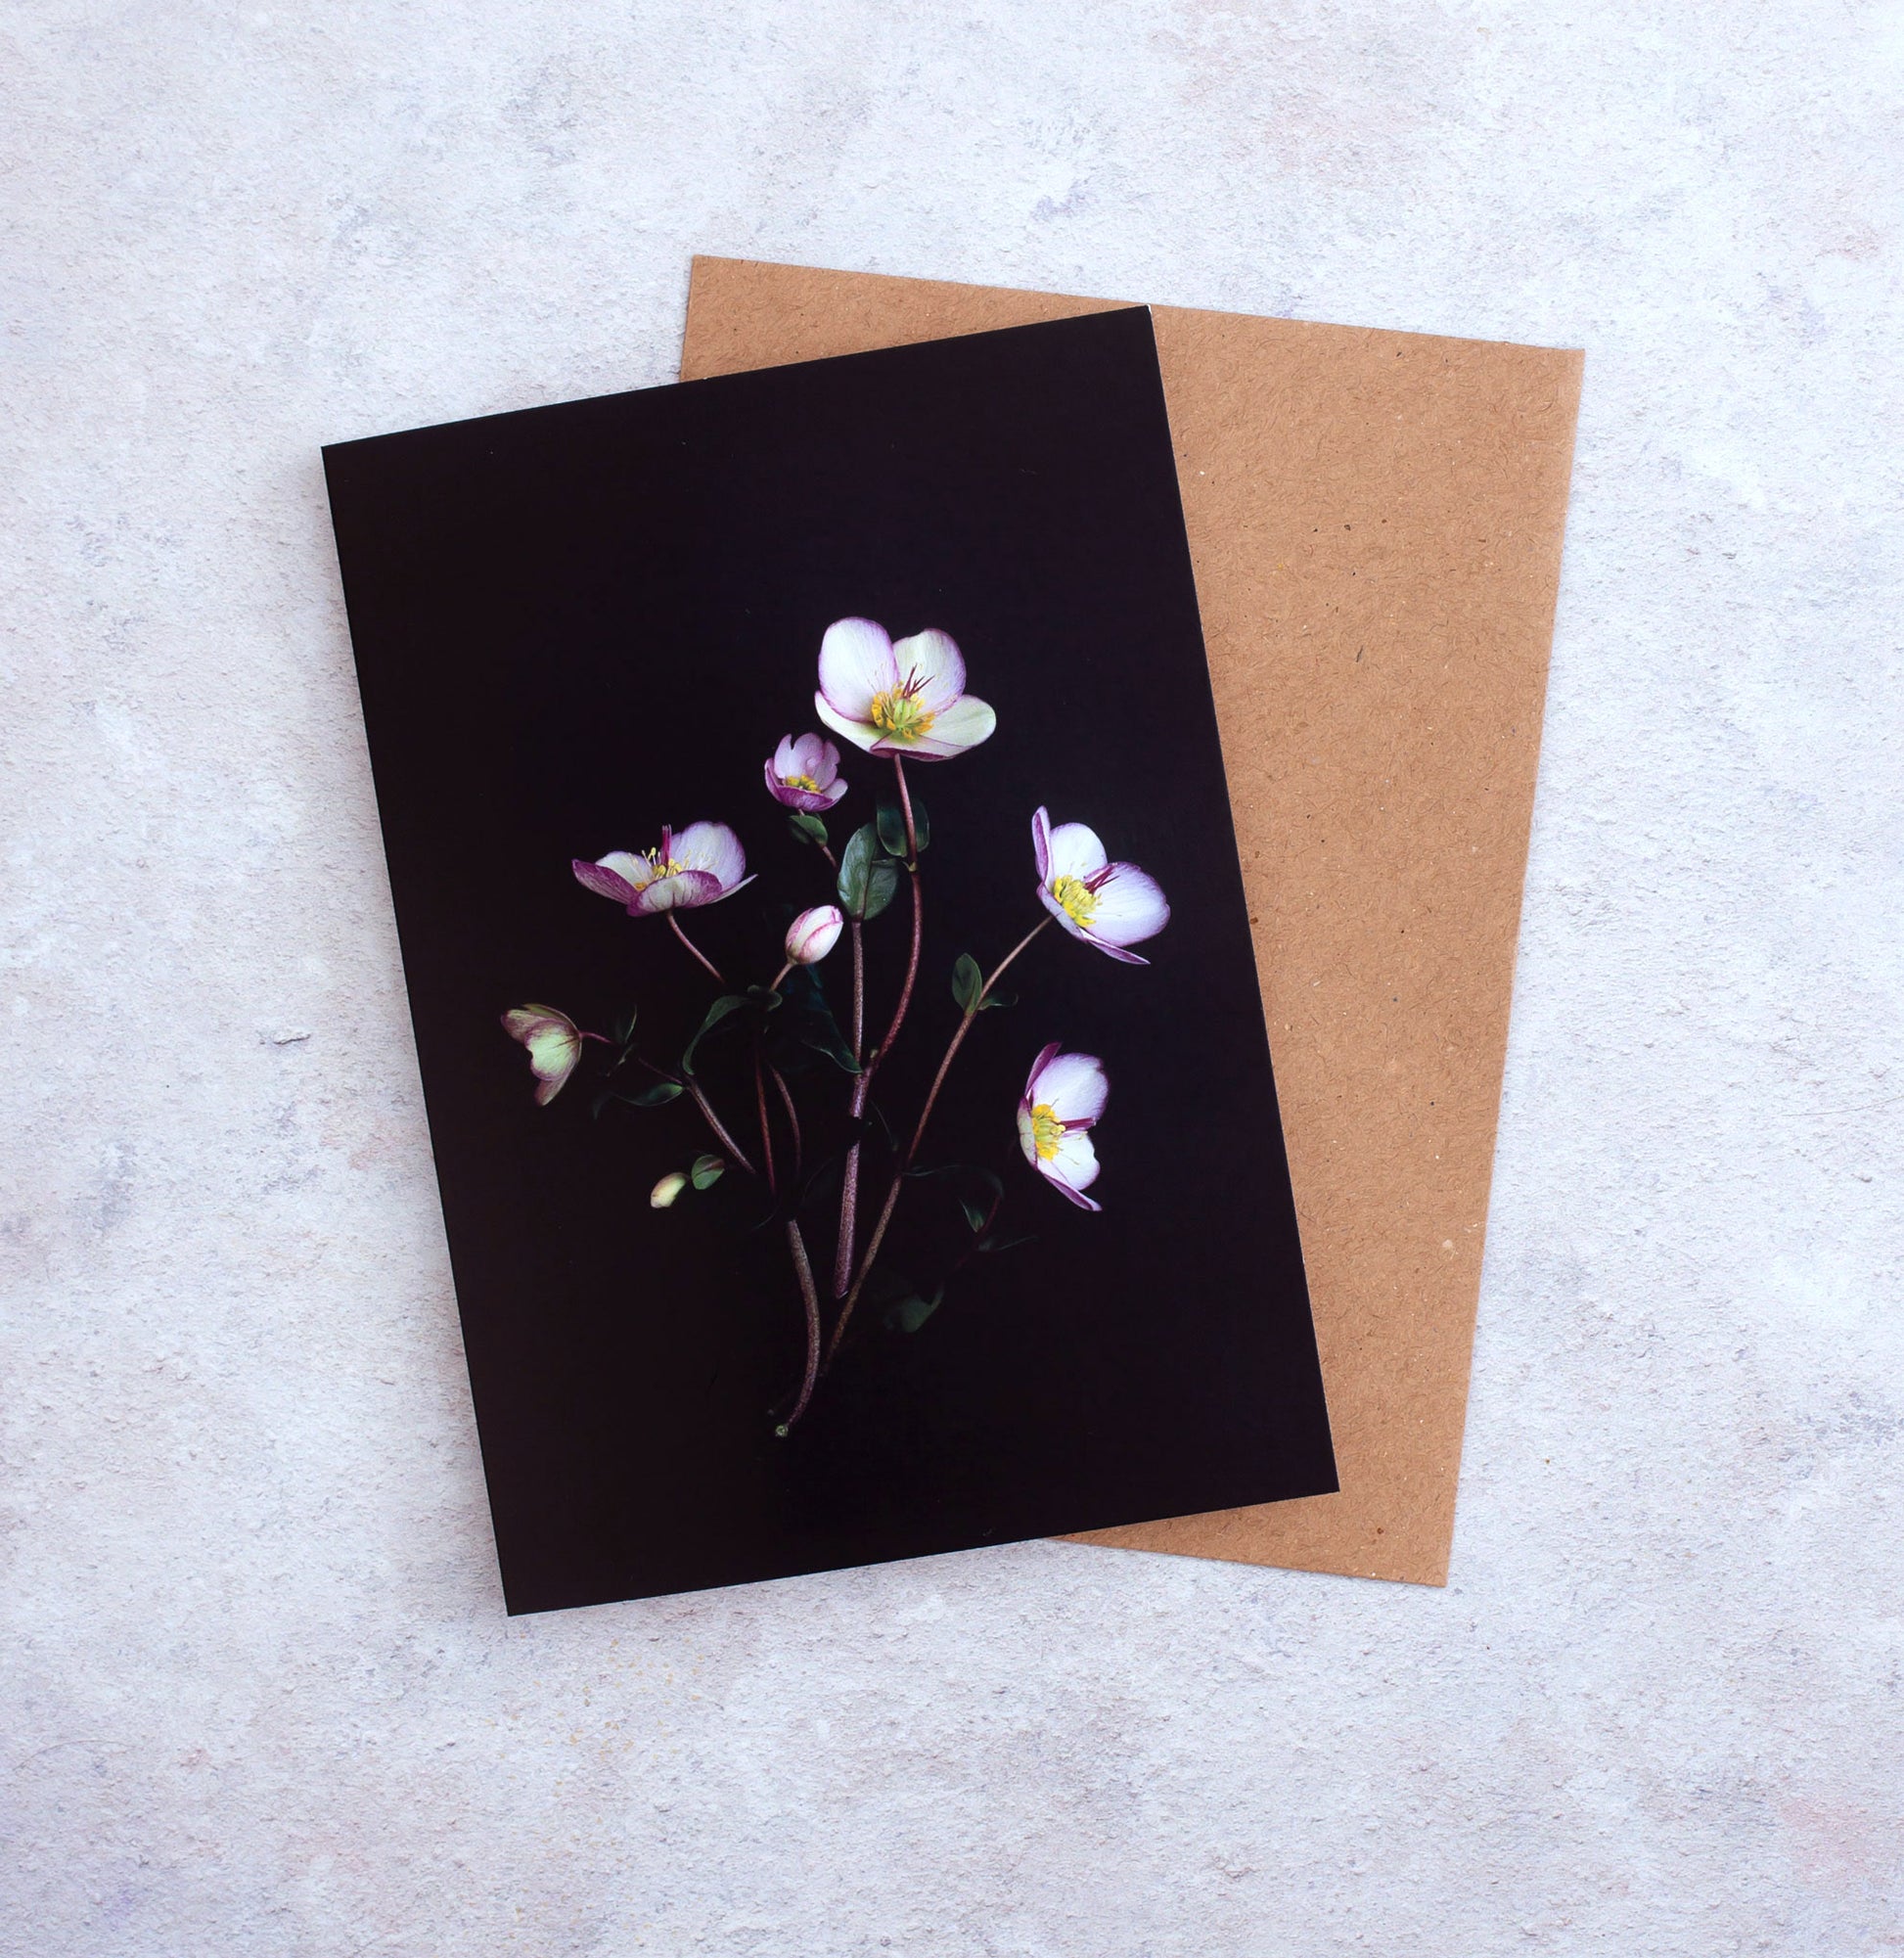 Botanical greeting card featuring Helleborus 'Picotee' photographed on a black background.